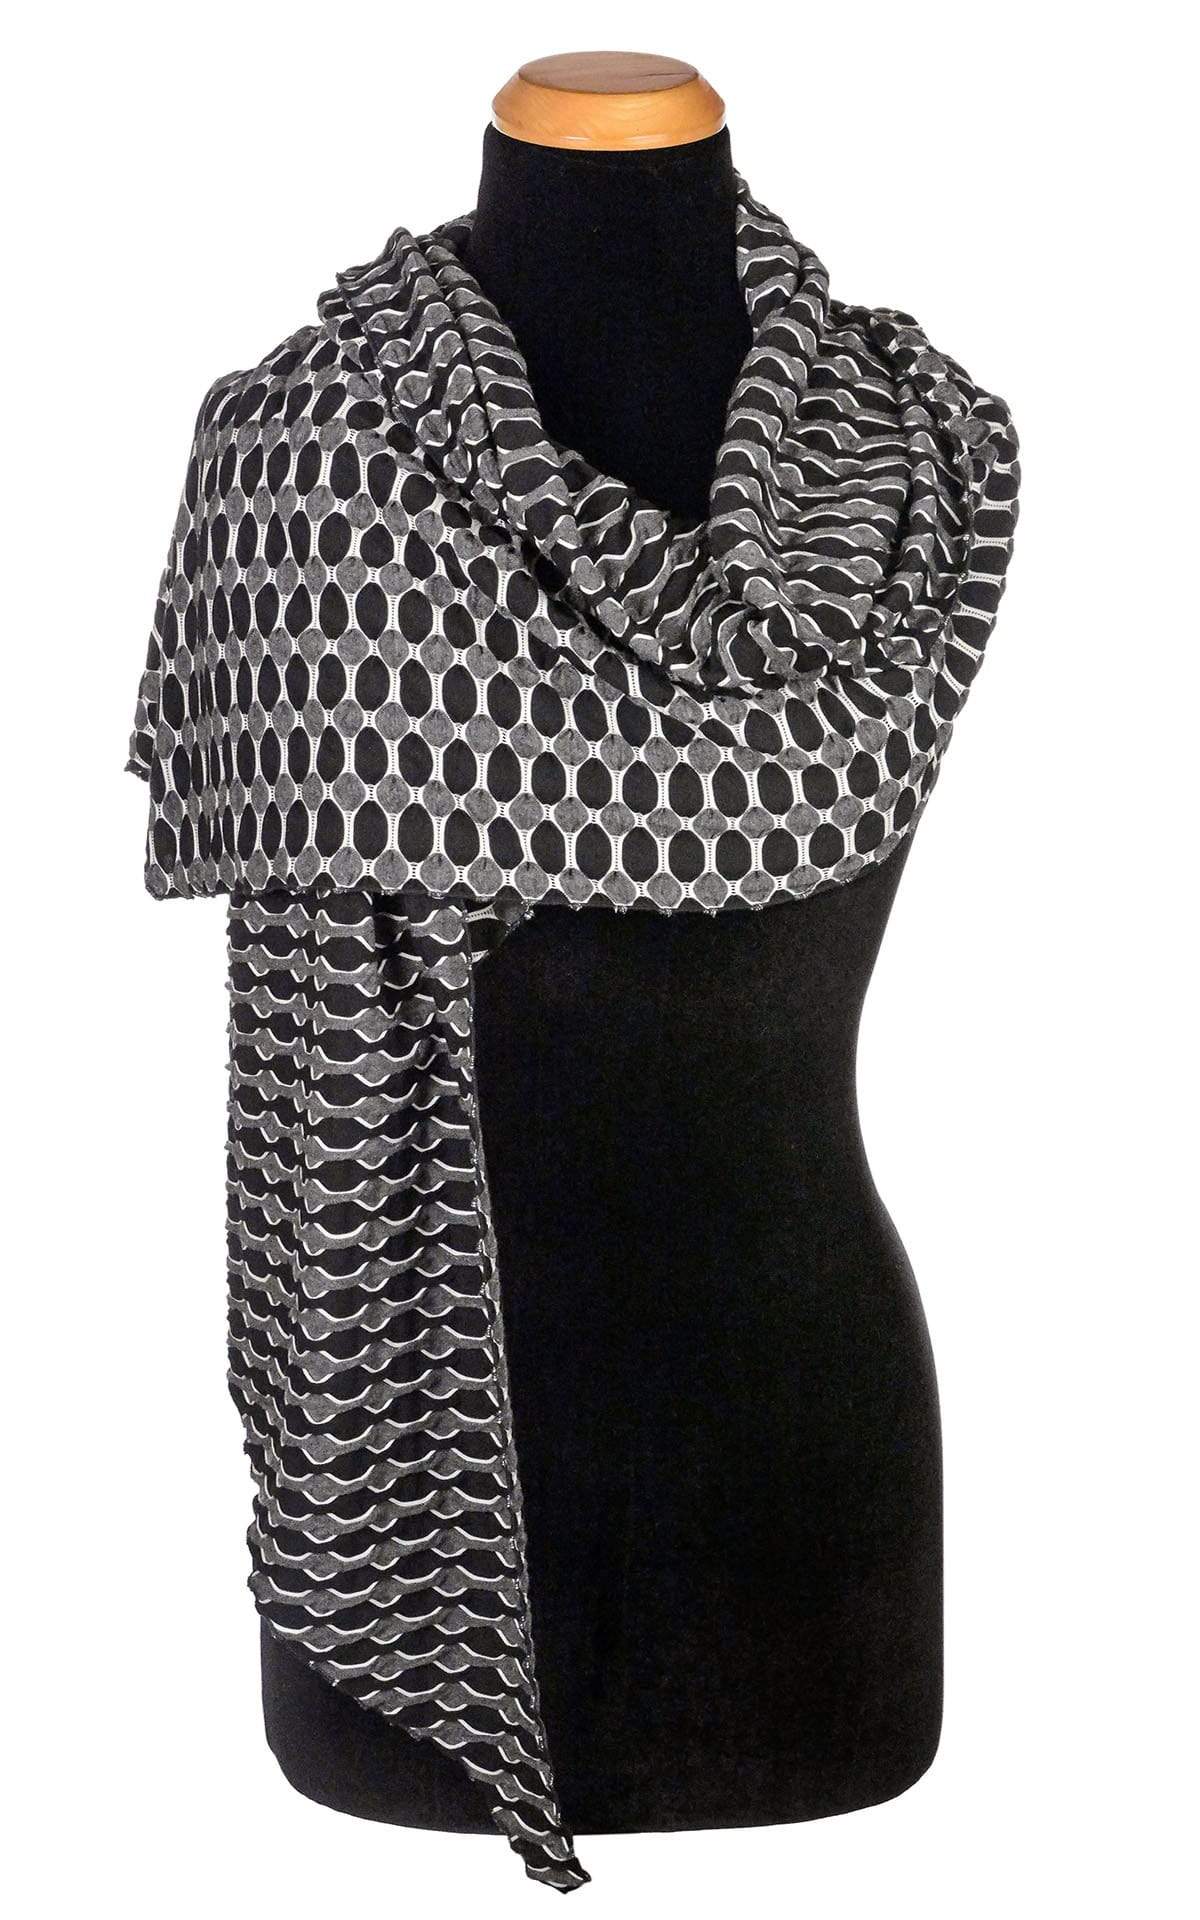 Women’s  Large Handkerchief Scarf, Wrap on Mannequin shown draped over shoulder | Lunar and Solar Eclipse, black knit with white lattice patterning exposing sections of gray and white| Handmade in Seattle WA | Pandemonium Millinery